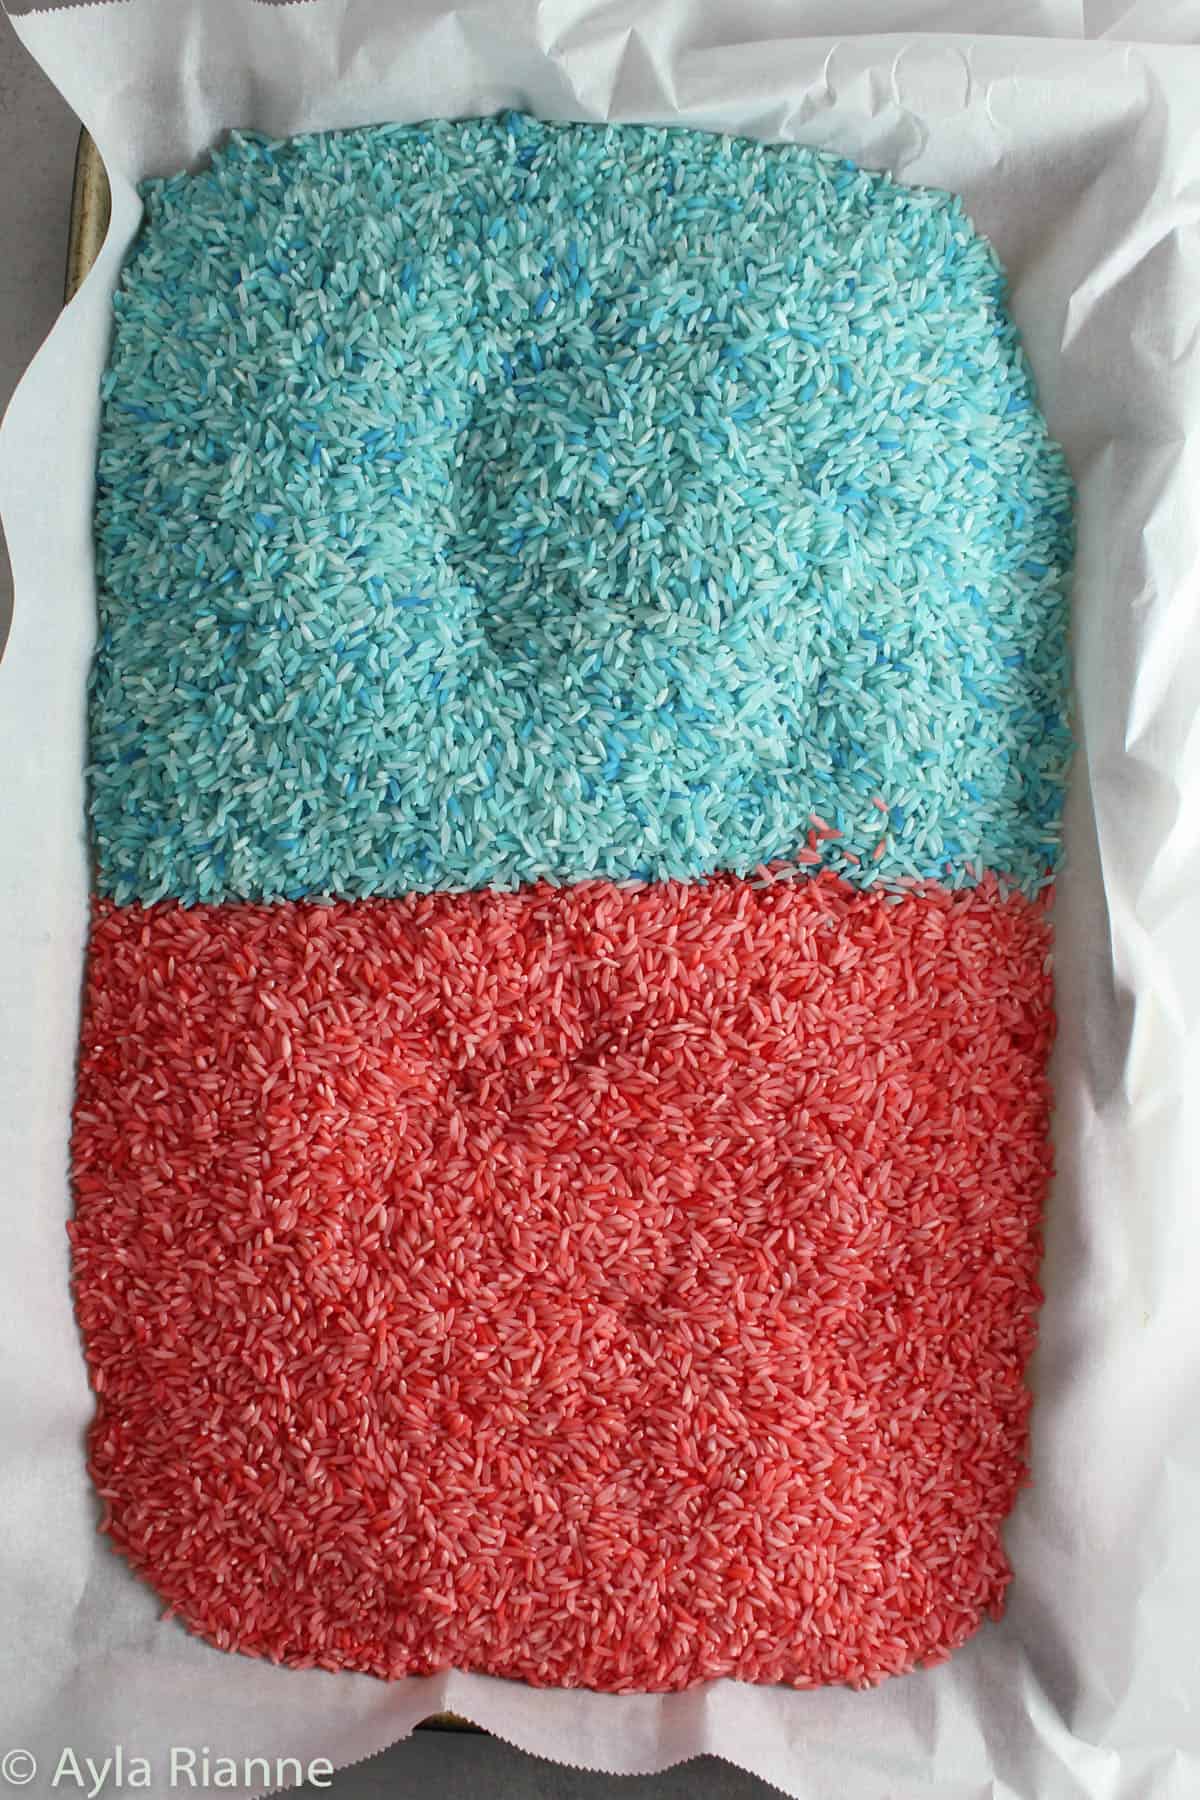 red and blue colored rice on a baking pan